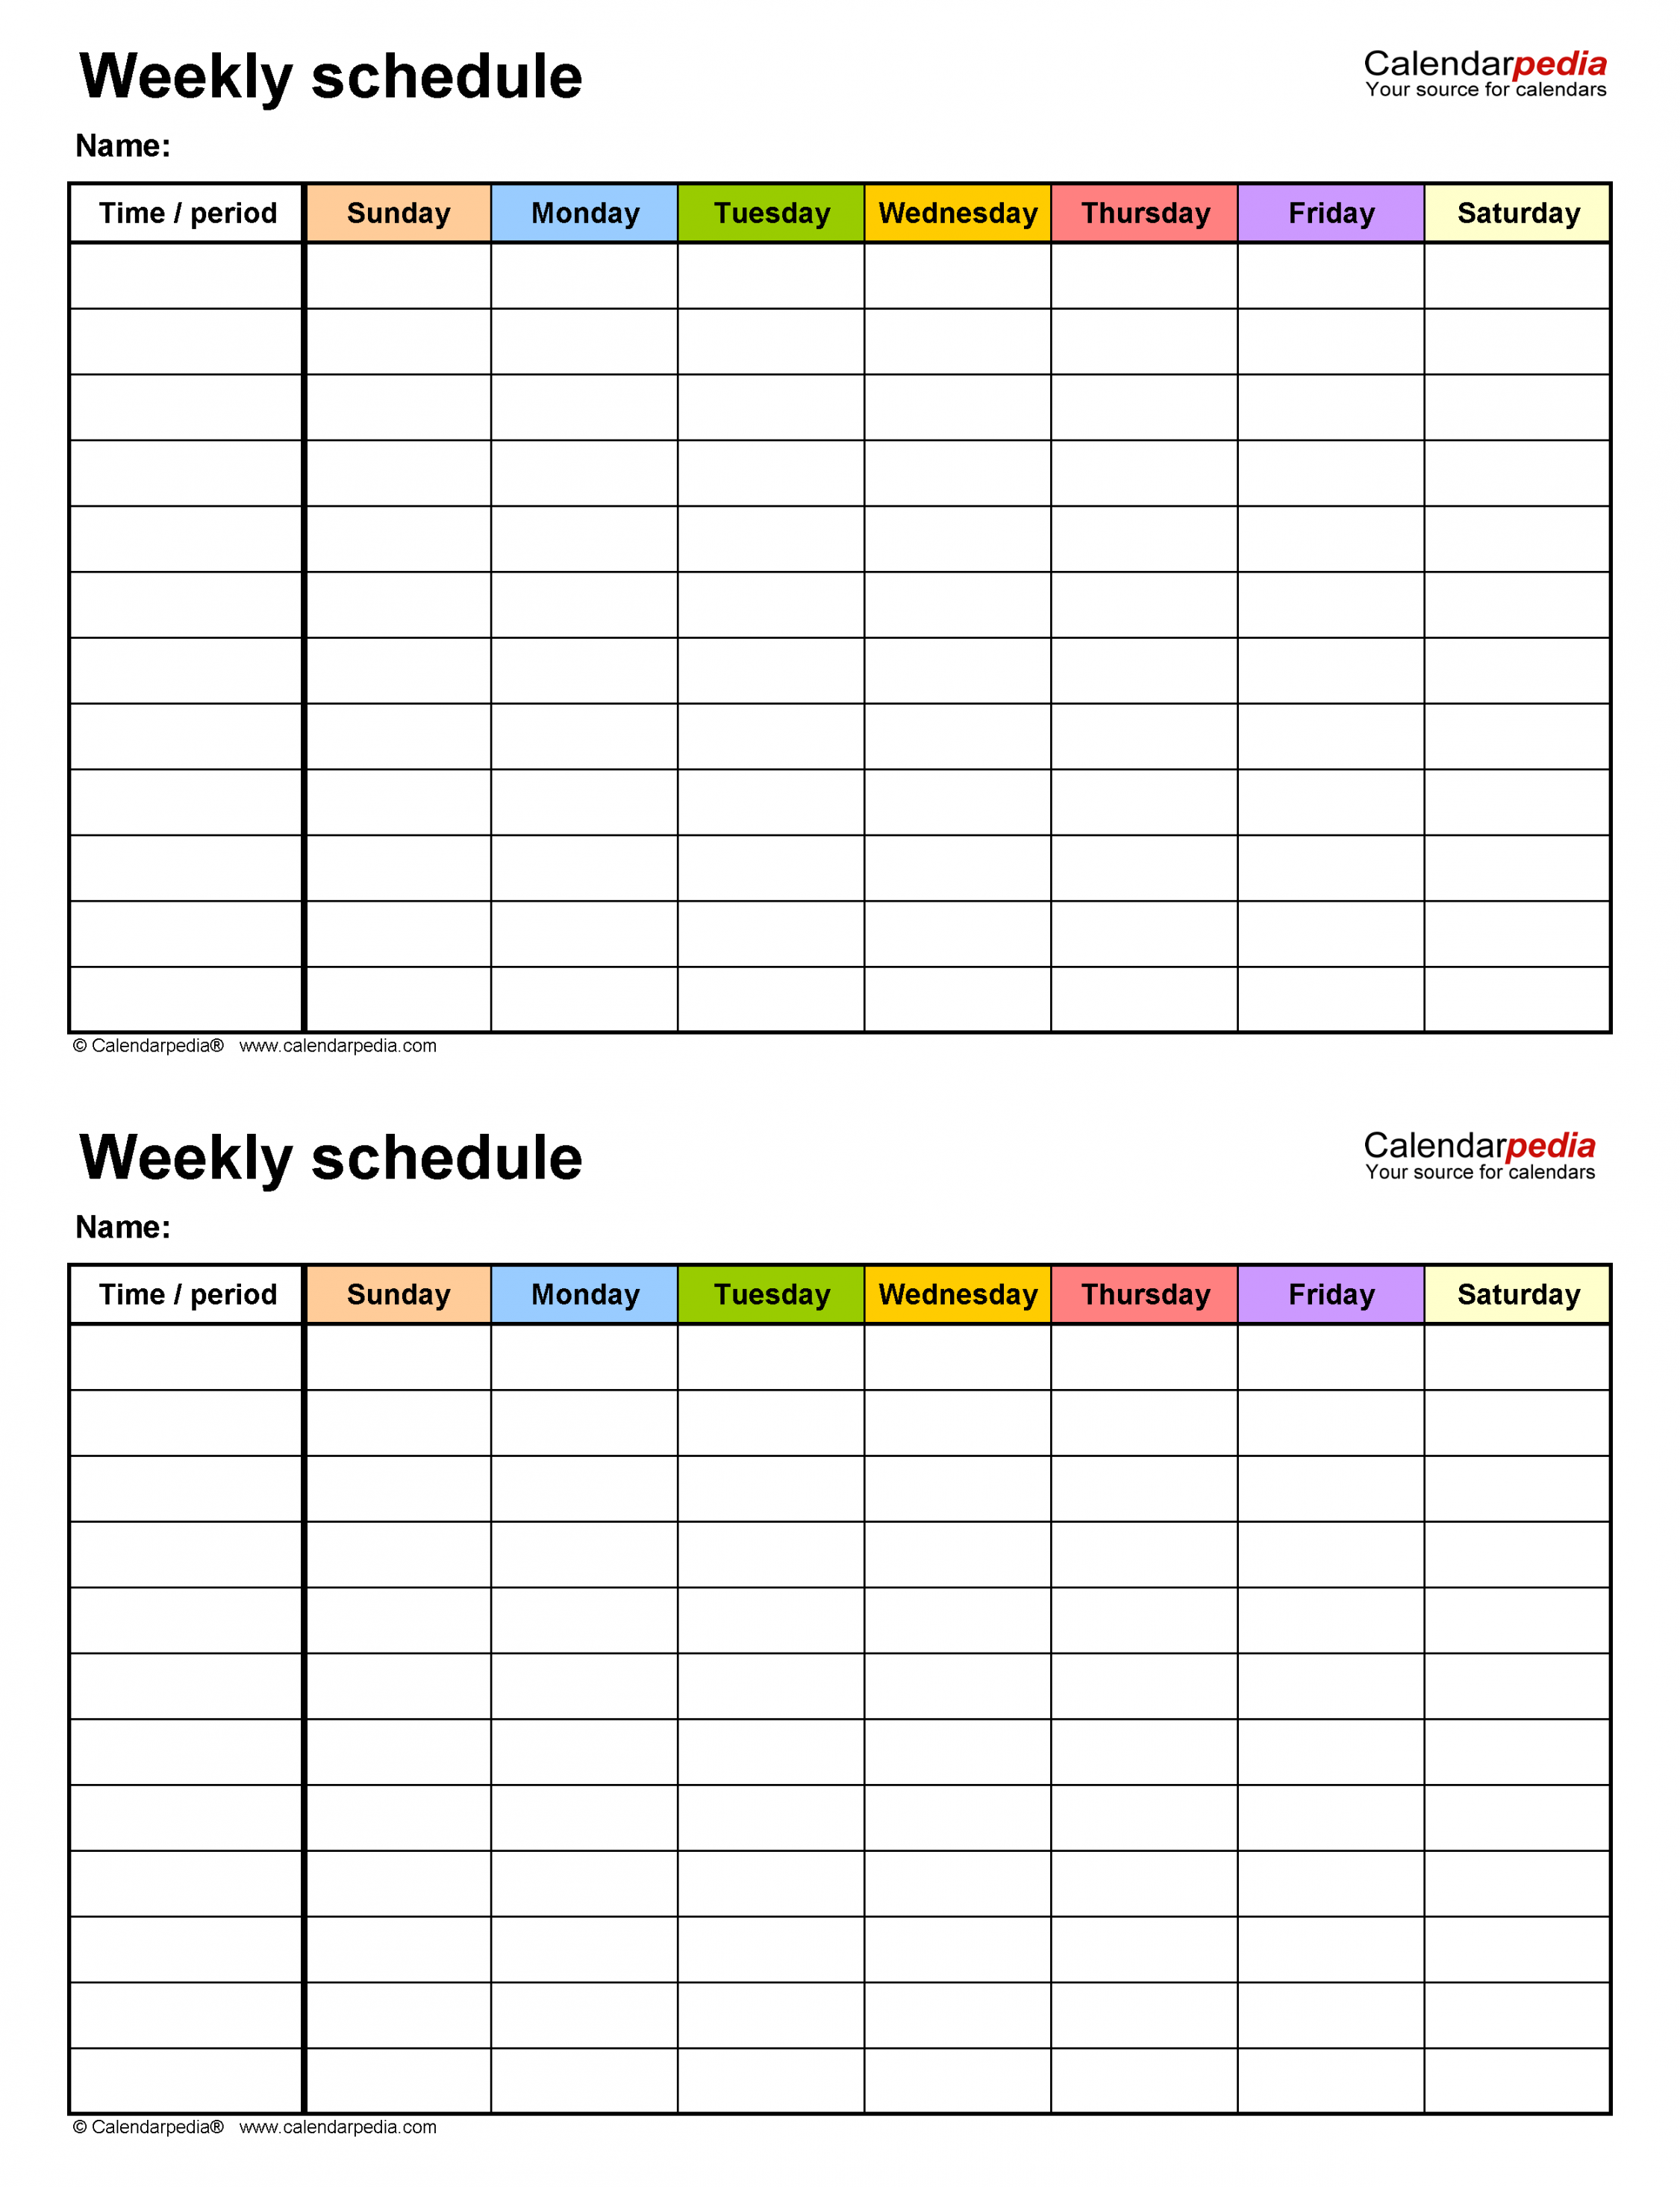 Free Weekly Schedules for Excel -  Templates